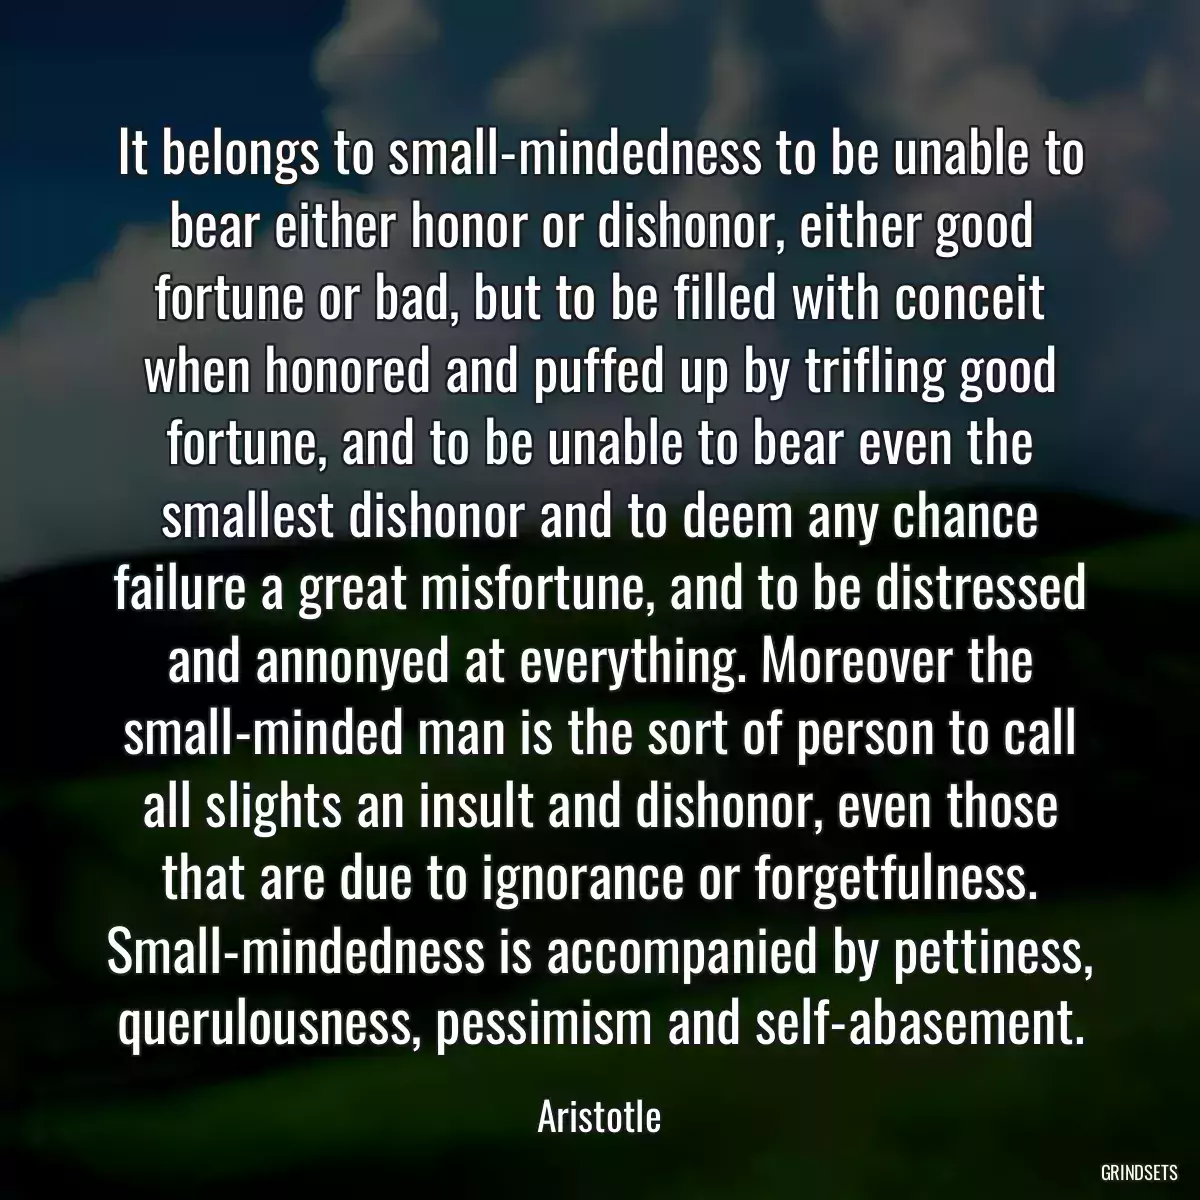 It belongs to small-mindedness to be unable to bear either honor or dishonor, either good fortune or bad, but to be filled with conceit when honored and puffed up by trifling good fortune, and to be unable to bear even the smallest dishonor and to deem any chance failure a great misfortune, and to be distressed and annonyed at everything. Moreover the small-minded man is the sort of person to call all slights an insult and dishonor, even those that are due to ignorance or forgetfulness. Small-mindedness is accompanied by pettiness, querulousness, pessimism and self-abasement.